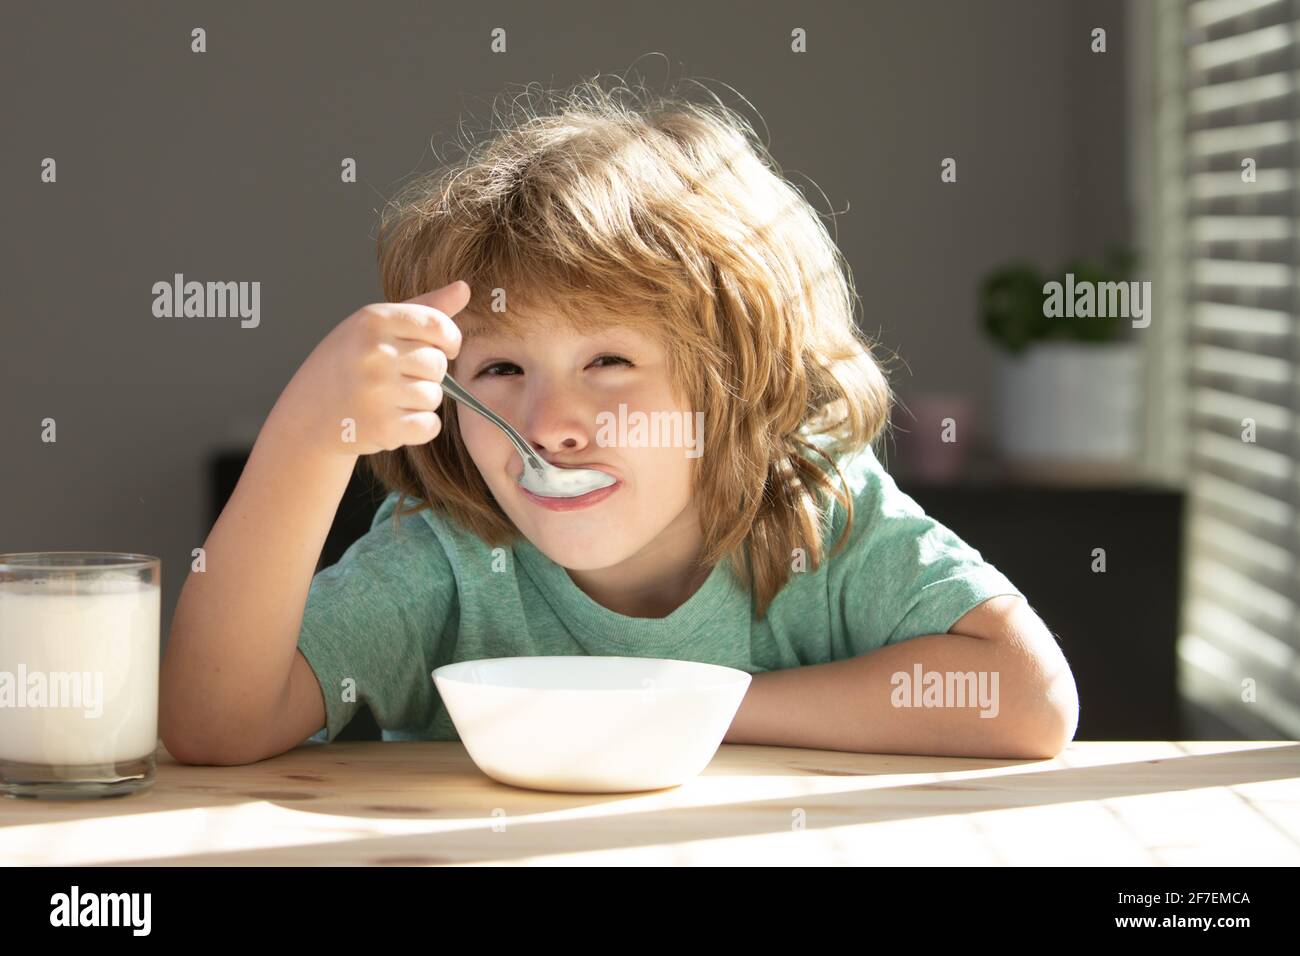 Child eat. Little healthy hungry boy eating soup from with spoon. Stock Photo